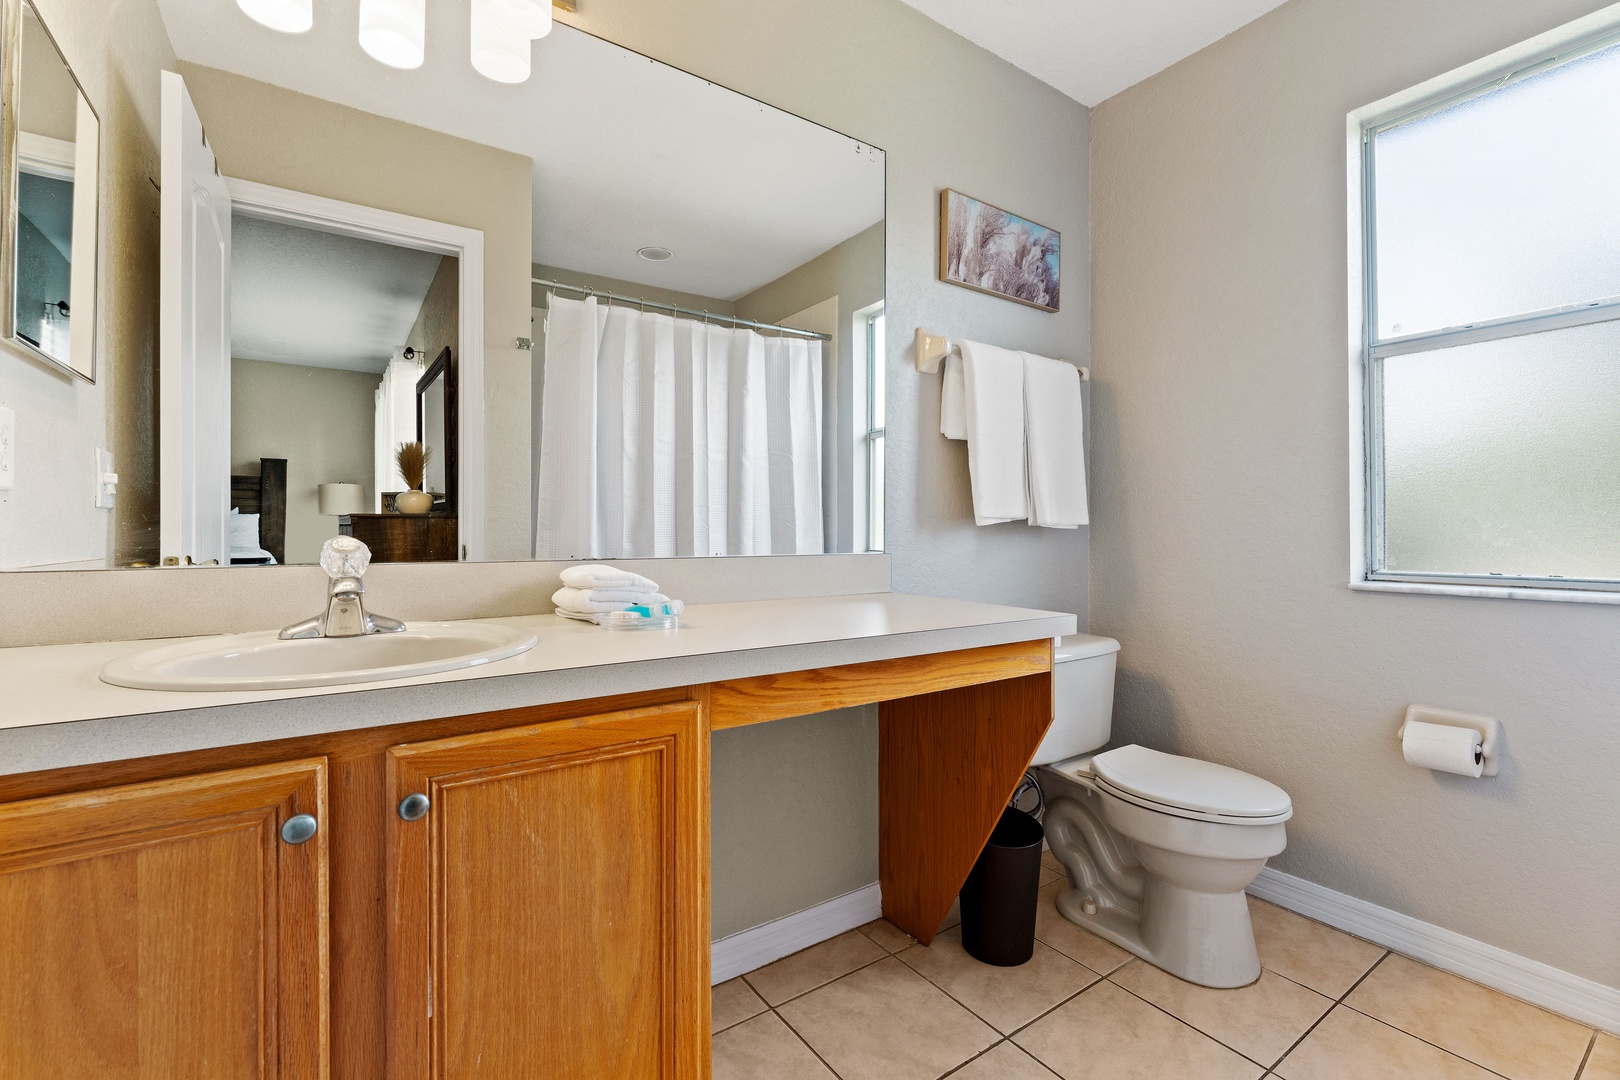 The king en suite offers a single vanity & shower/tub combo